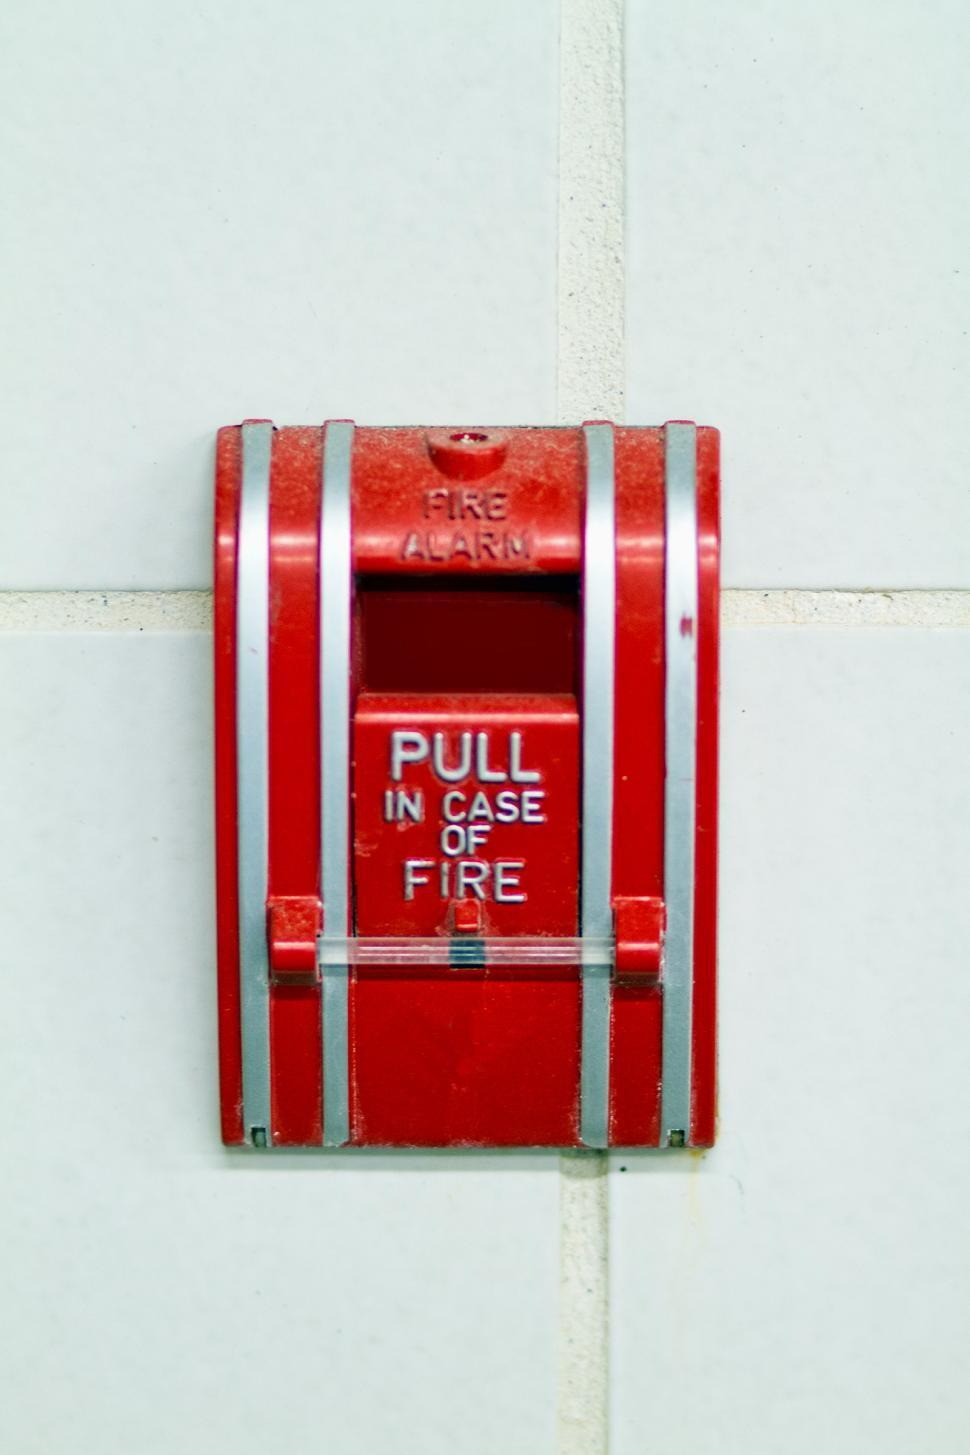 Get Free of Fire Alarm Online. Download Latest Free